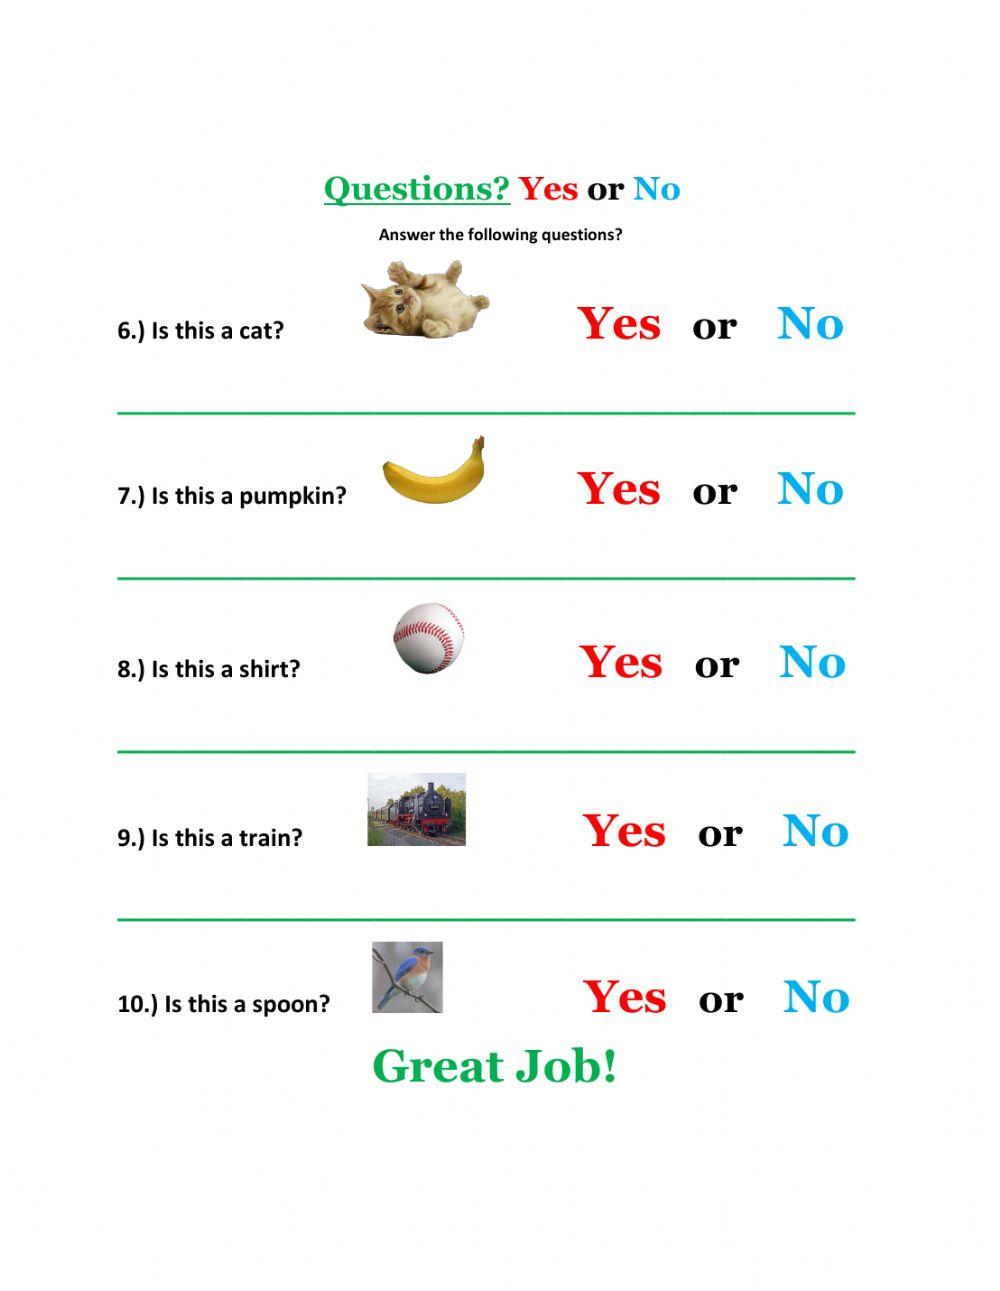 Yes or No Questions-2